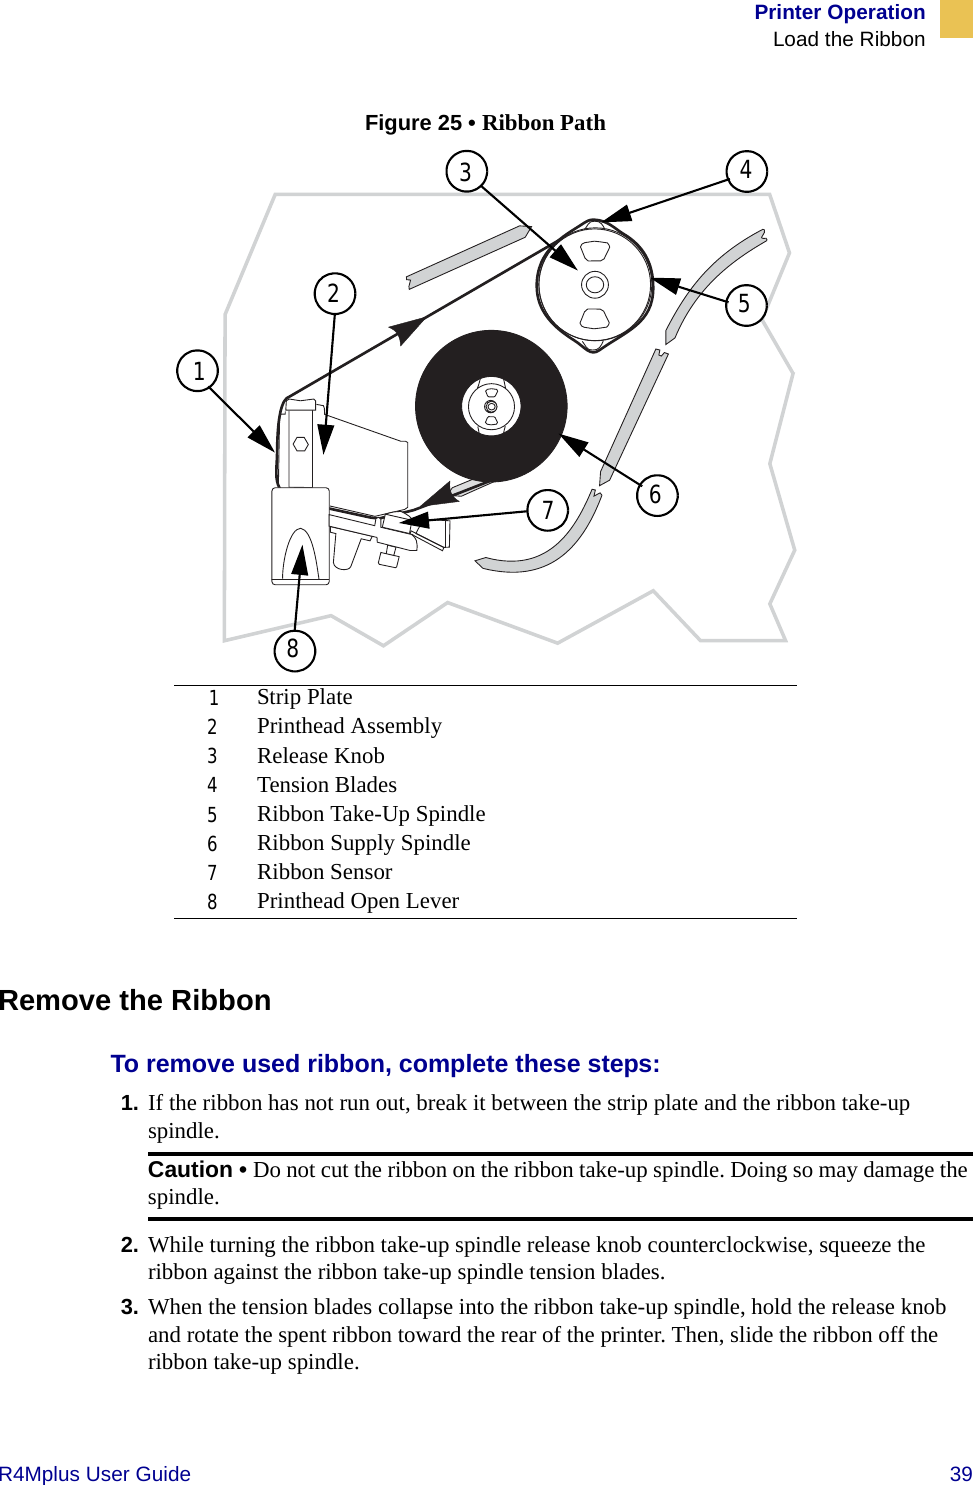 Printer OperationLoad the RibbonR4Mplus User Guide  39Figure 25 • Ribbon PathRemove the RibbonTo remove used ribbon, complete these steps:1. If the ribbon has not run out, break it between the strip plate and the ribbon take-up spindle.2. While turning the ribbon take-up spindle release knob counterclockwise, squeeze the ribbon against the ribbon take-up spindle tension blades.3. When the tension blades collapse into the ribbon take-up spindle, hold the release knob and rotate the spent ribbon toward the rear of the printer. Then, slide the ribbon off the ribbon take-up spindle.1Strip Plate2Printhead Assembly3Release Knob4Tension Blades5Ribbon Take-Up Spindle6Ribbon Supply Spindle7Ribbon Sensor8Printhead Open LeverCaution • Do not cut the ribbon on the ribbon take-up spindle. Doing so may damage the spindle.32145678